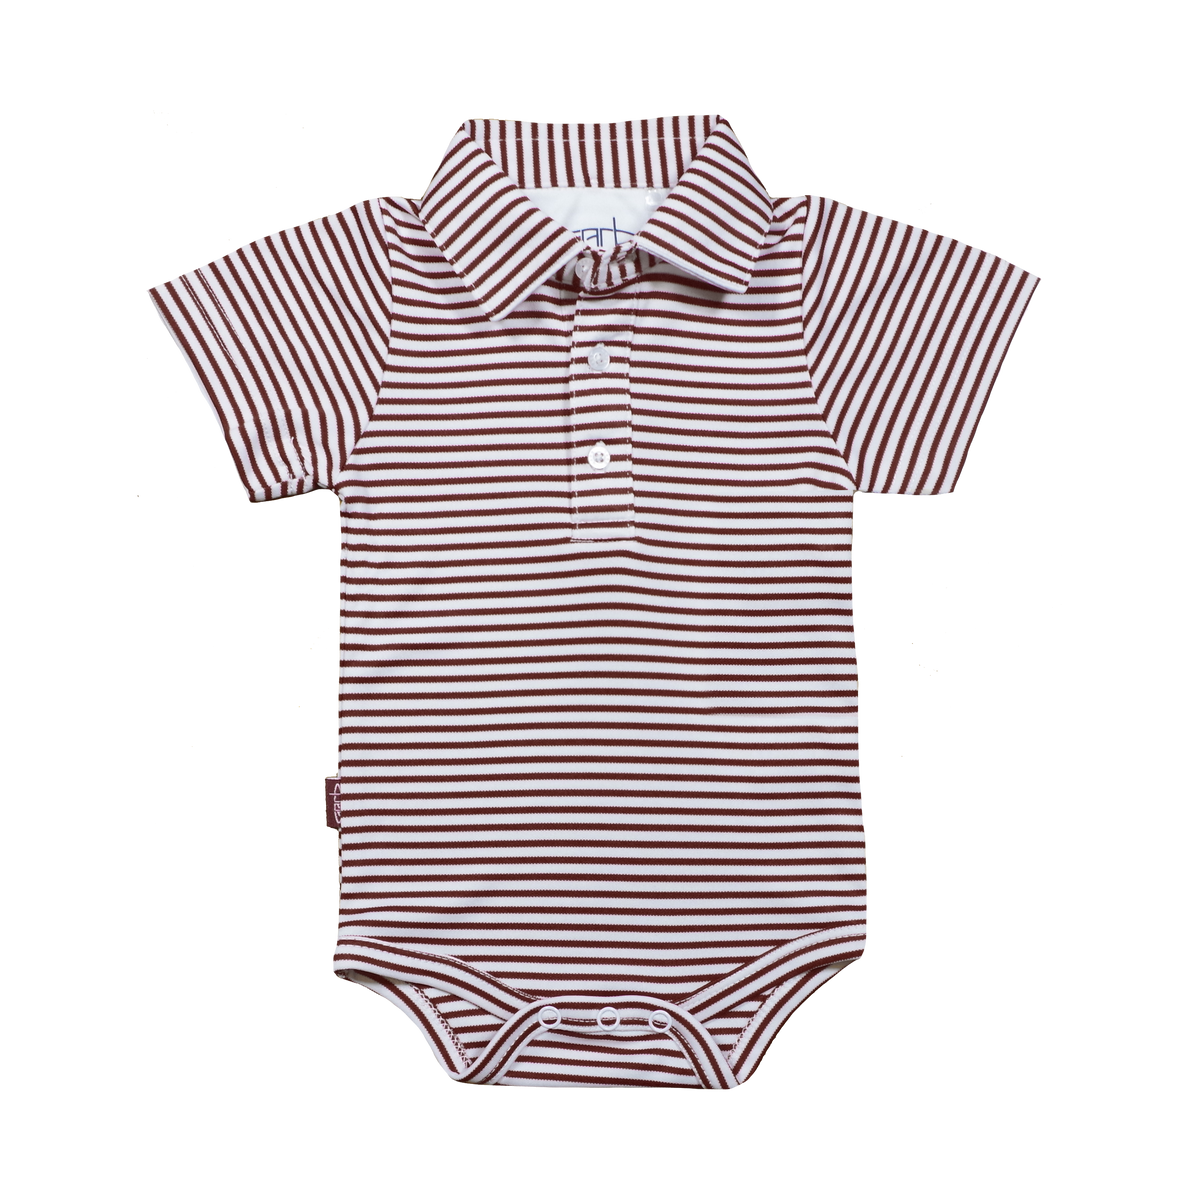 Infant boys maroon and white striped onesie polo